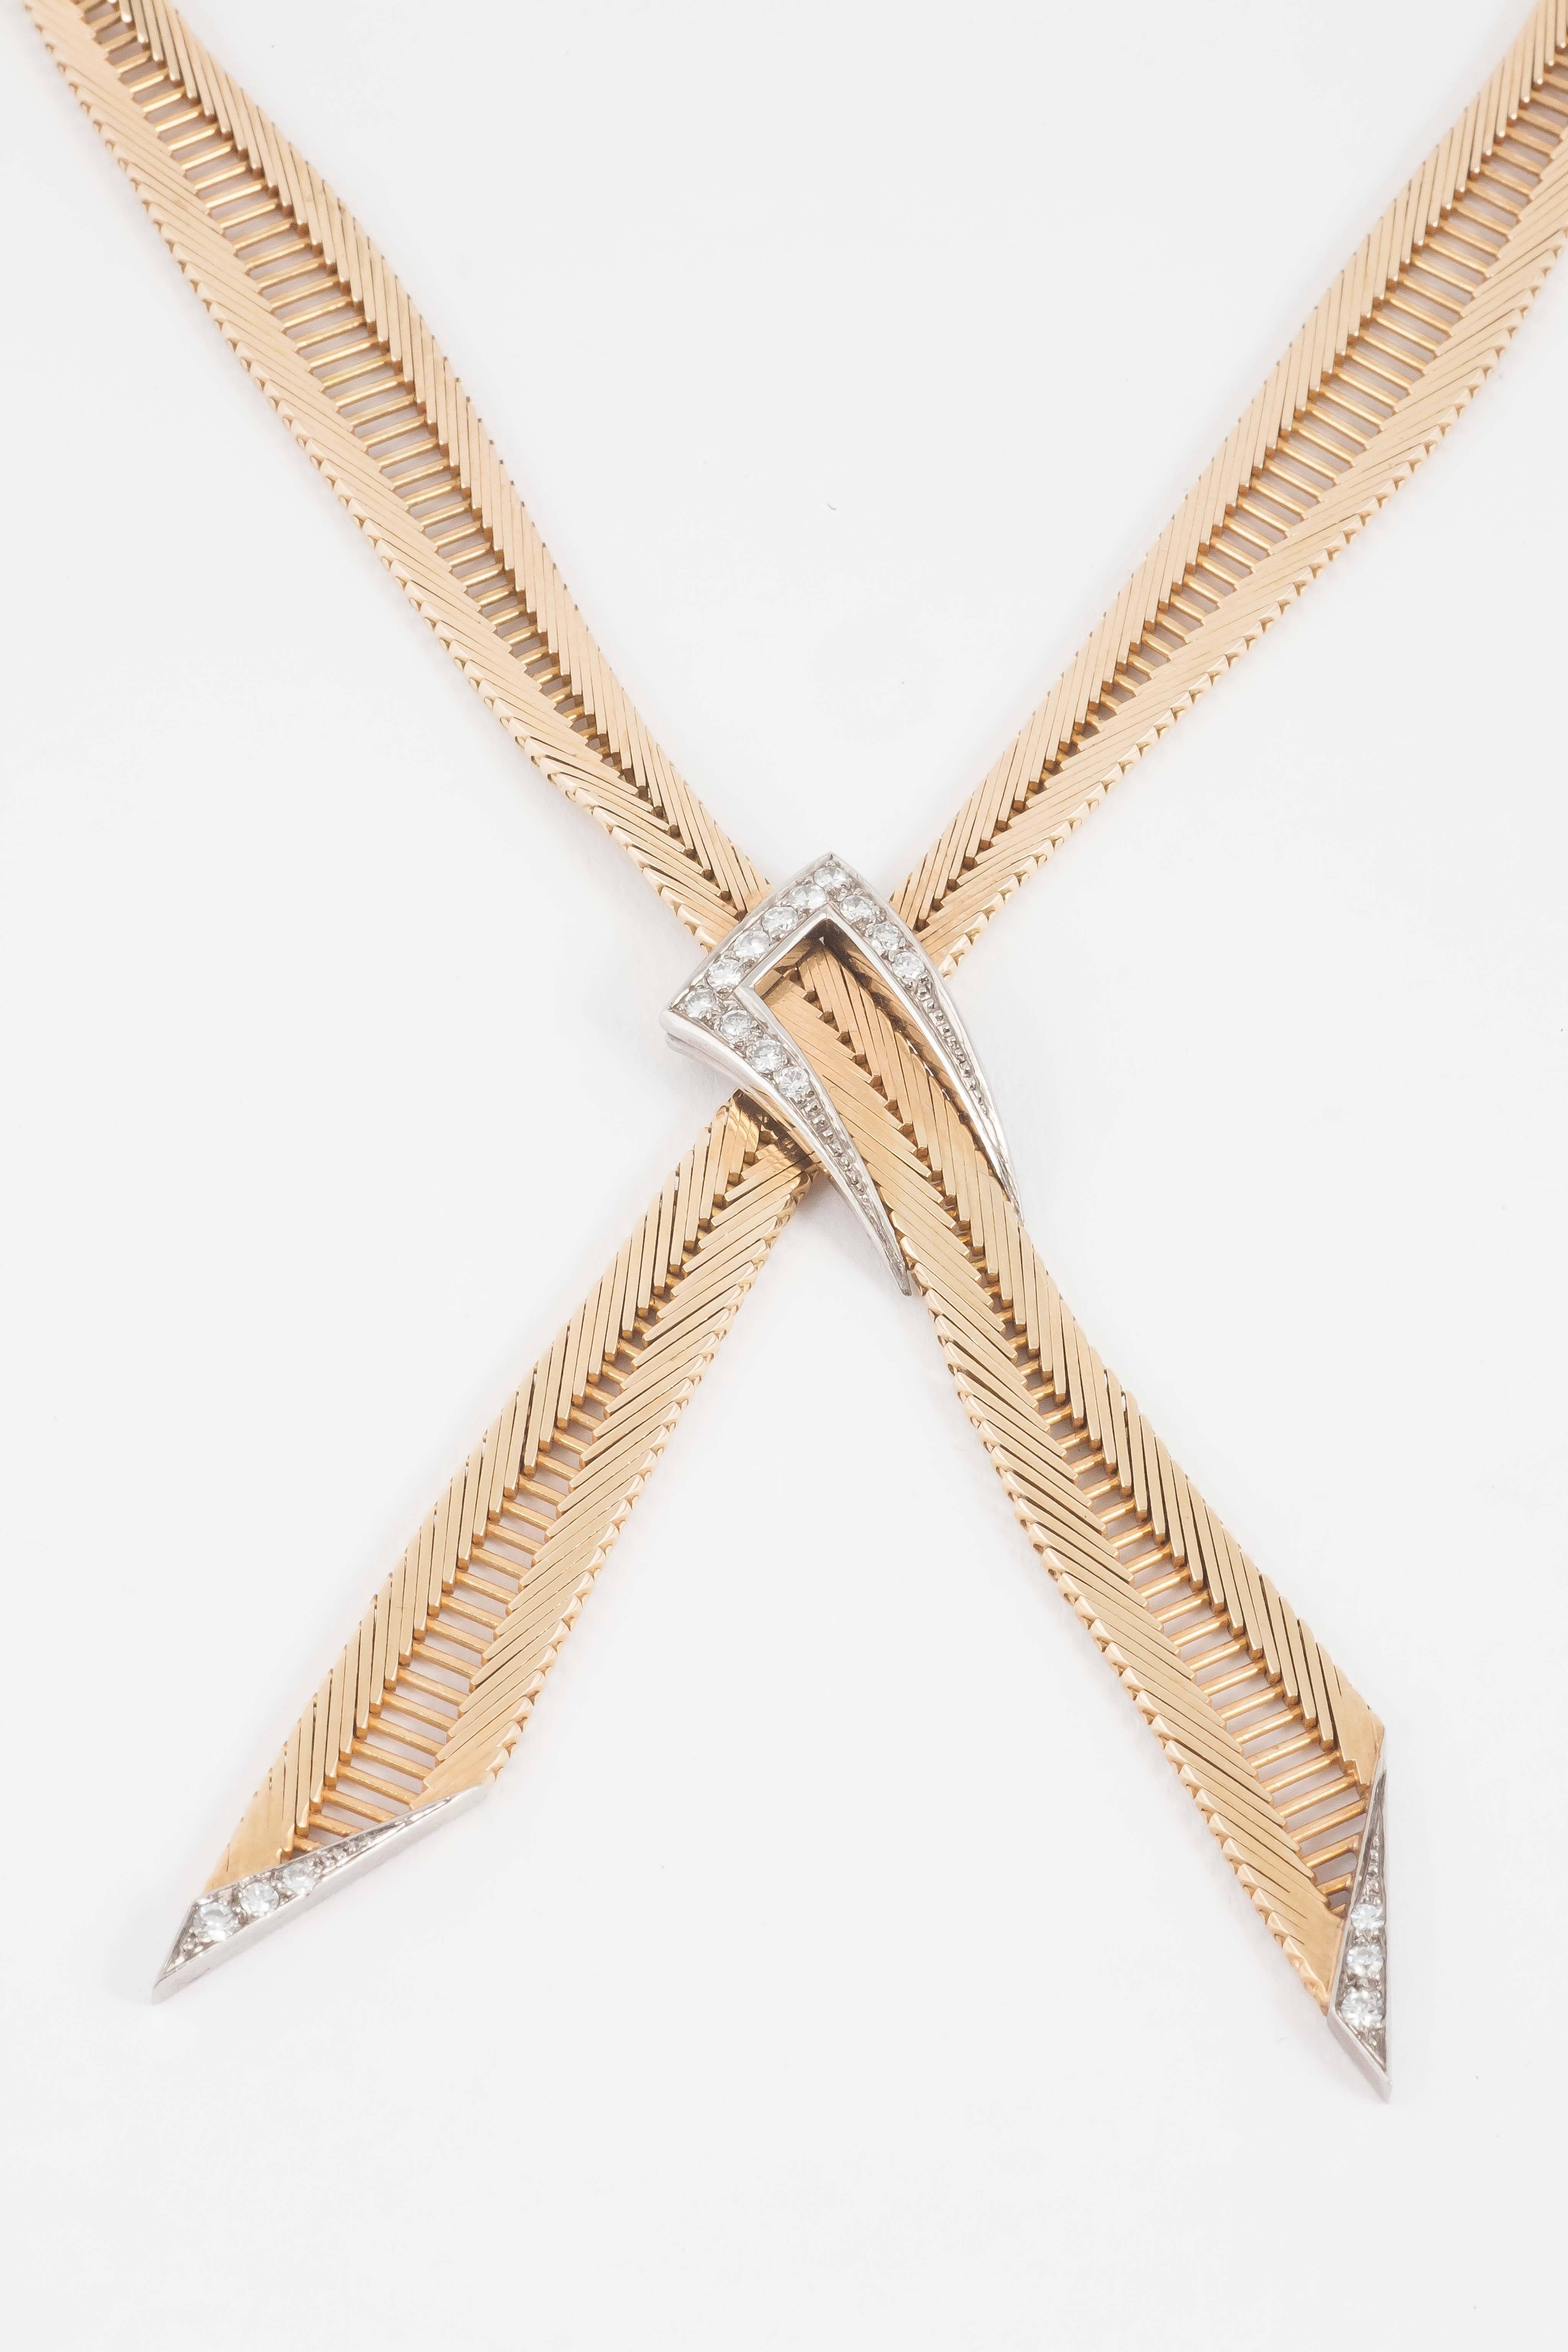 A finely made French 18ct gold Necklace of tapering form tied at the centre with a diamond knot and diamond set terminals. c,1950